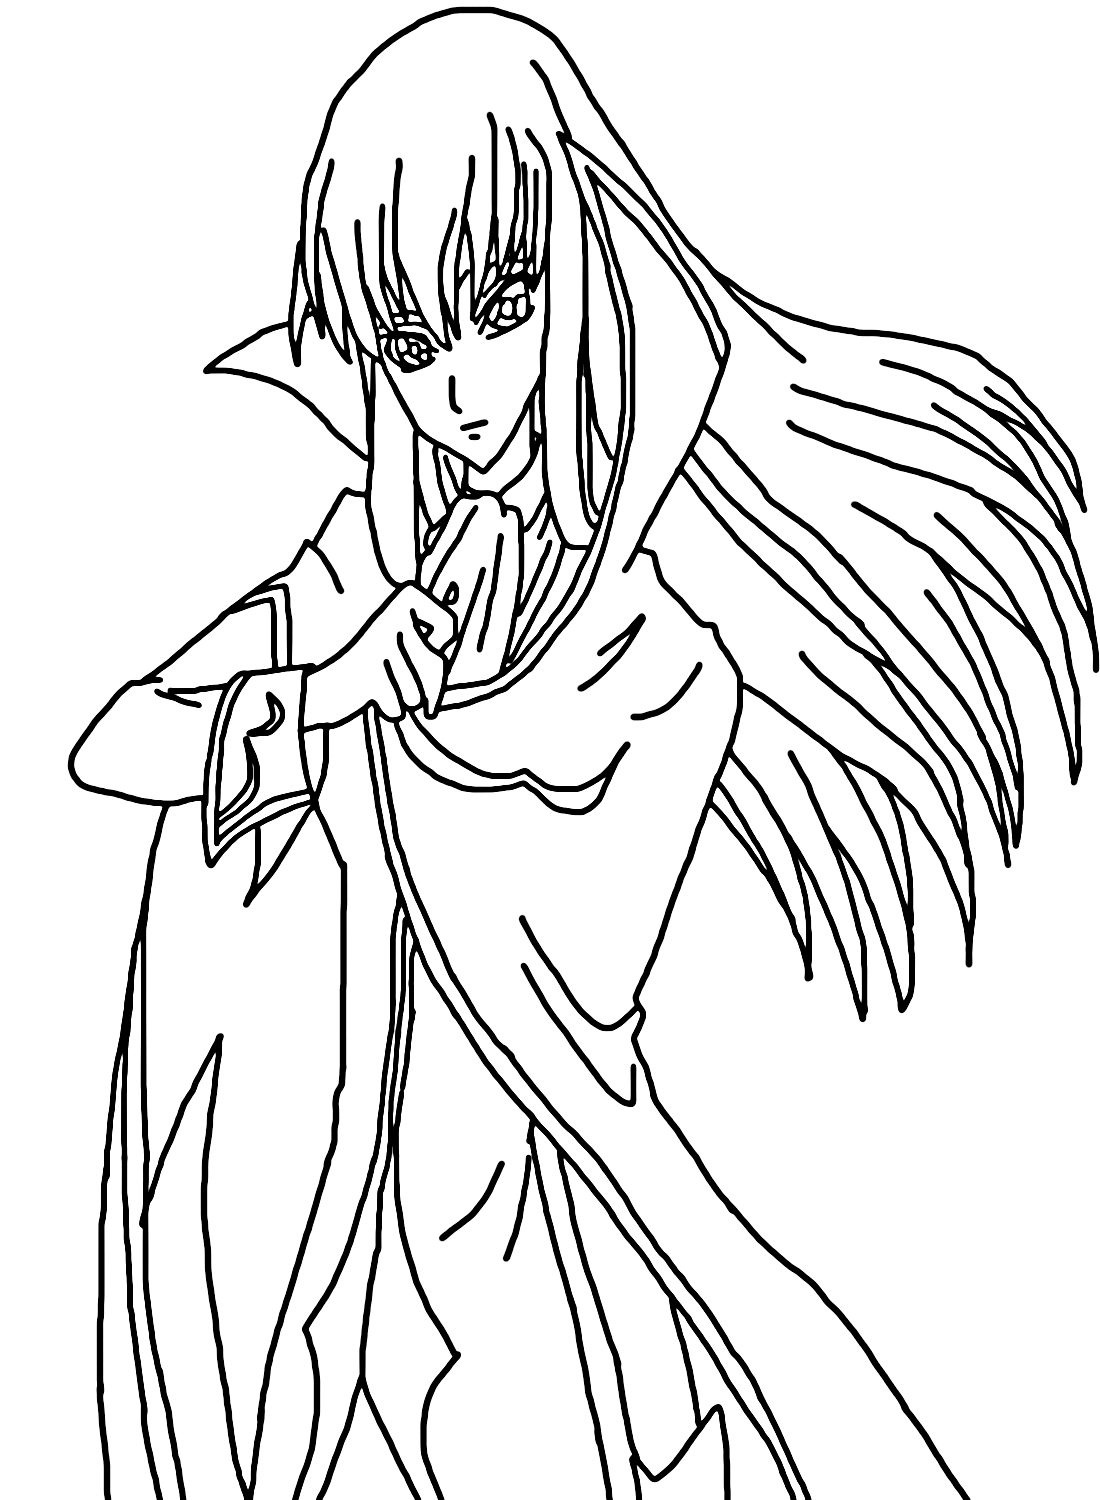 C.C. Code Geass Coloring Page PDF from C.C. Code Geass